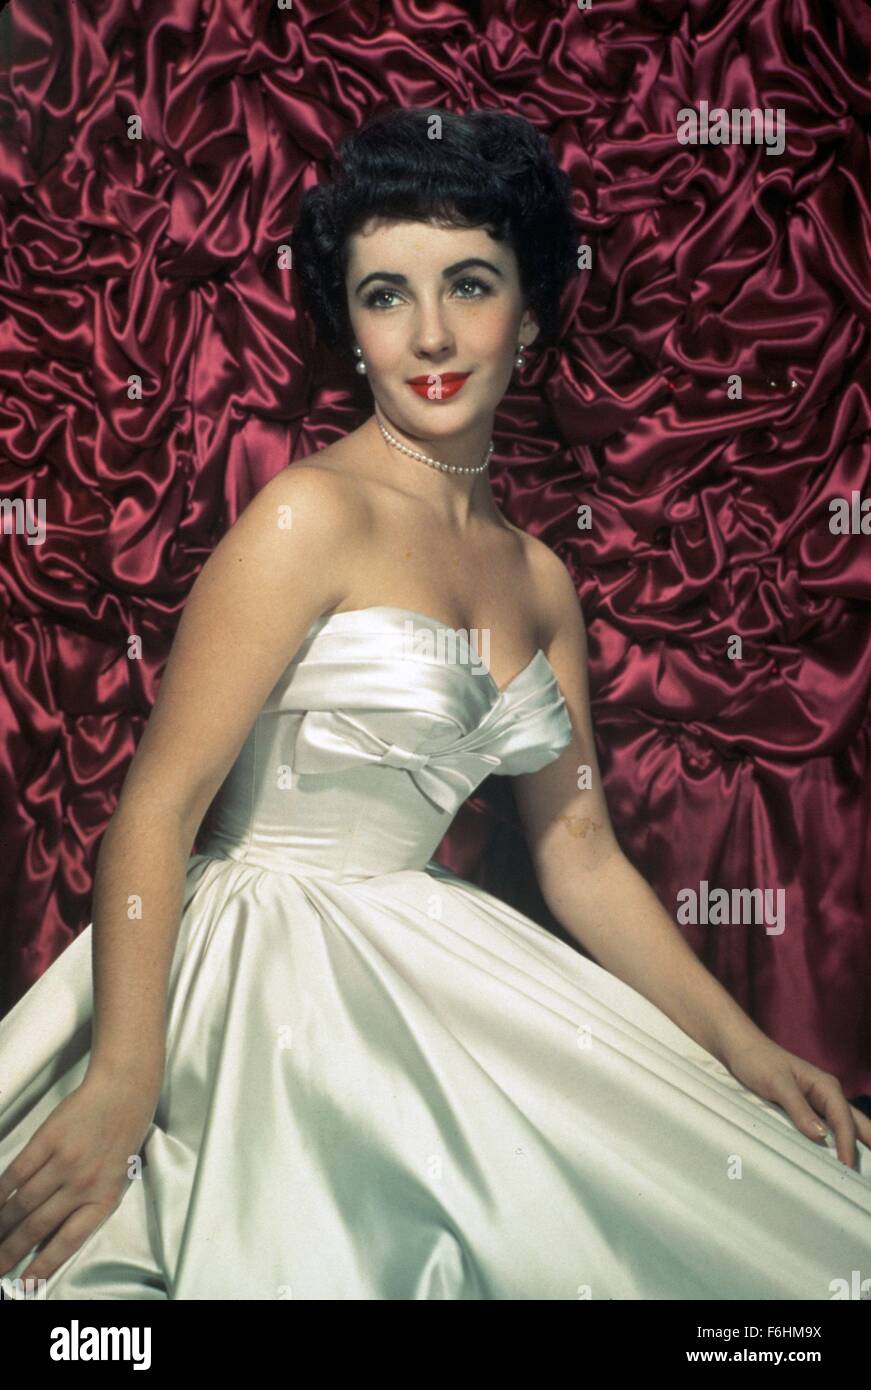 1951, Film Title: PLACE IN THE SUN, Director: GEORGE STEVENS, Pictured: PEARL KNECKLACE, ELIZABETH TAYLOR, PEARL EARINGS, RED LIPSTICK, SATIN DRESS, WHITE DRESS, LIZ TAYLOR, STUDIO, PORTRAIT, STRAPLESS DRESS, CLEAVAGE, EARRINGS - PEARL. (Credit Image: SNAP) Stock Photo